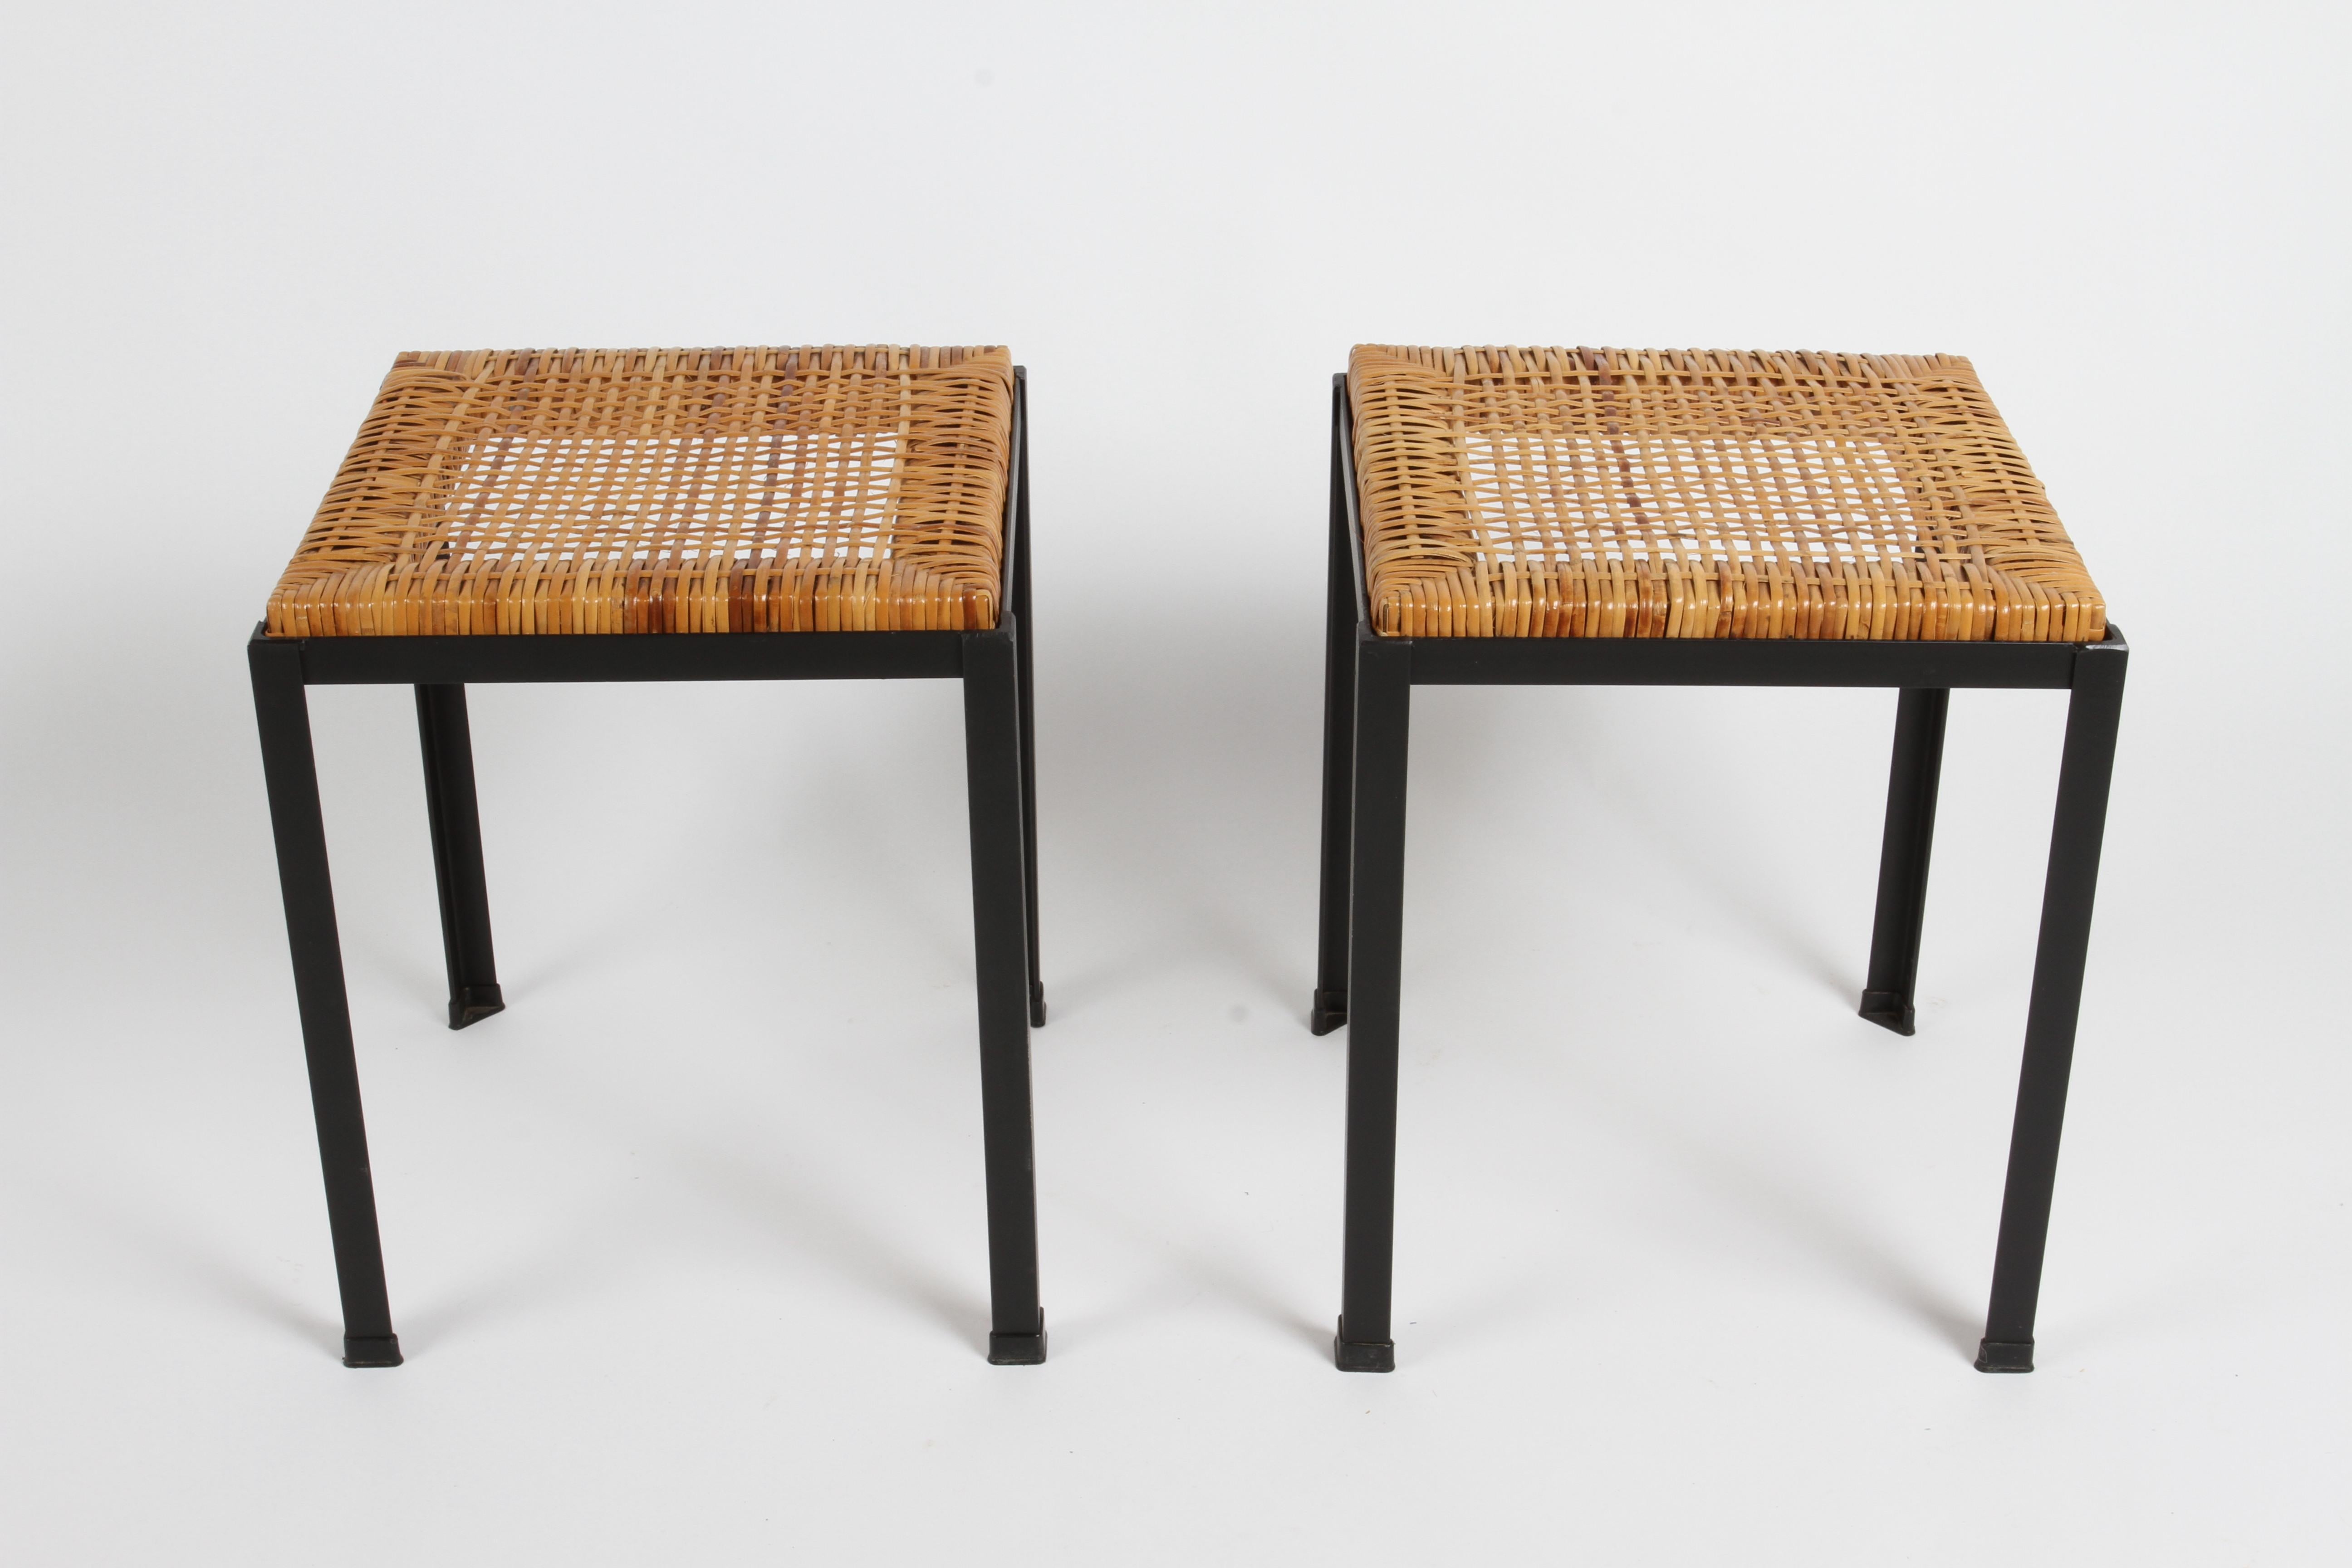 Inconnu Danny Ho Fong 1960's MCM Black Iron & Natural Wicker Caned Stools or Side Tables  en vente